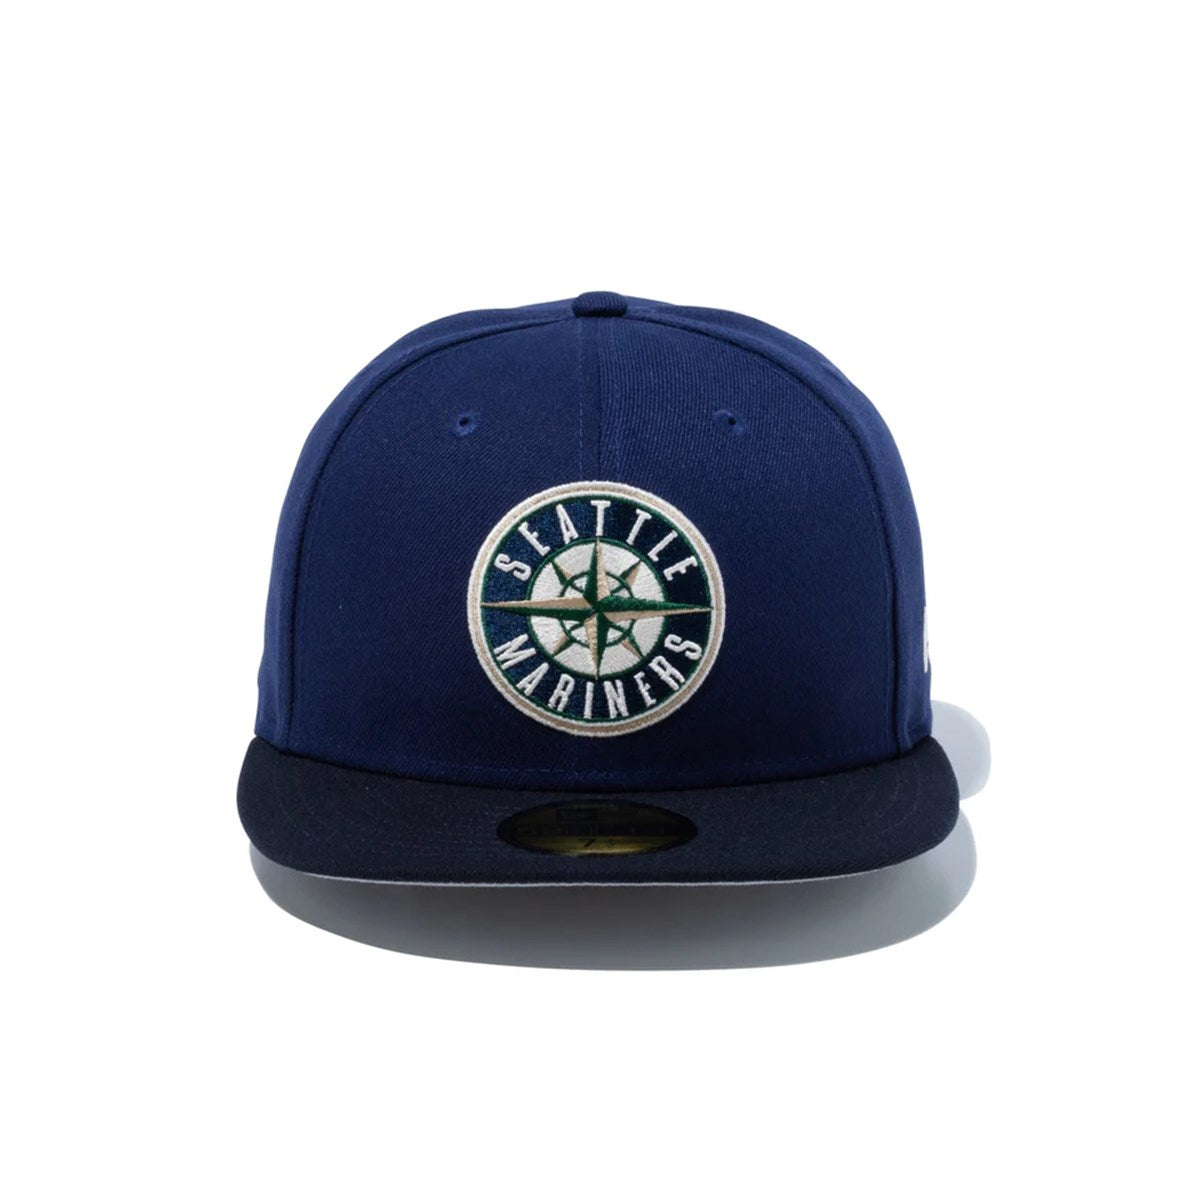 NEW ERA Seatles Mariners - 59FIFTY Vintage Color LNVY NVY【14174577】